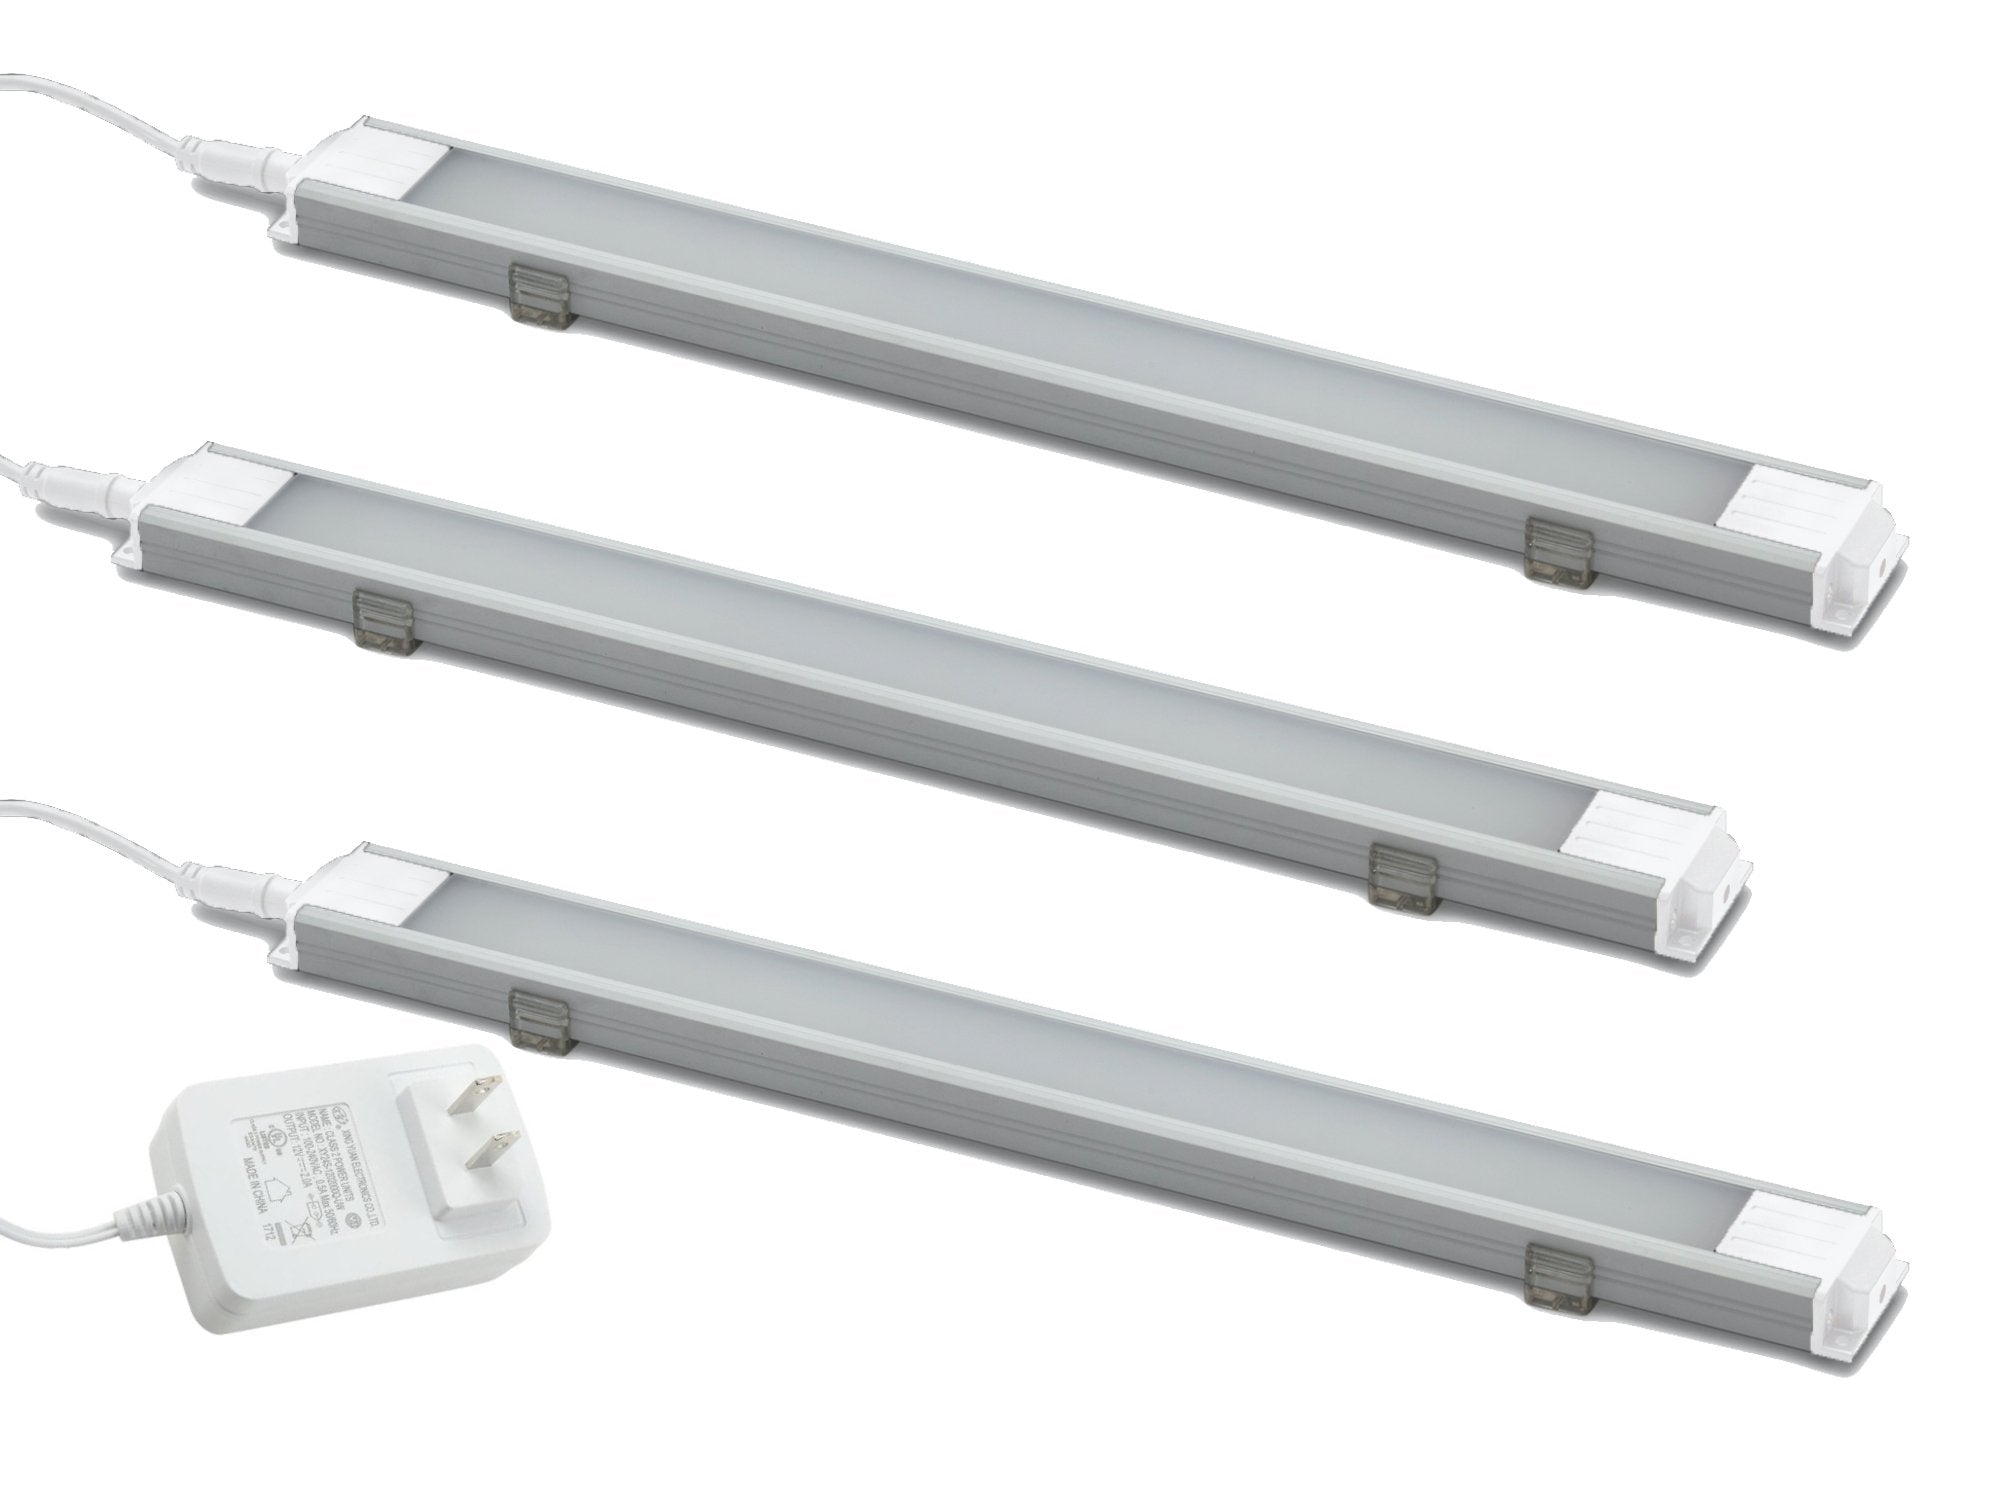 LED Display Lights (1 x Light Adapters, 2 x Light Extensions)